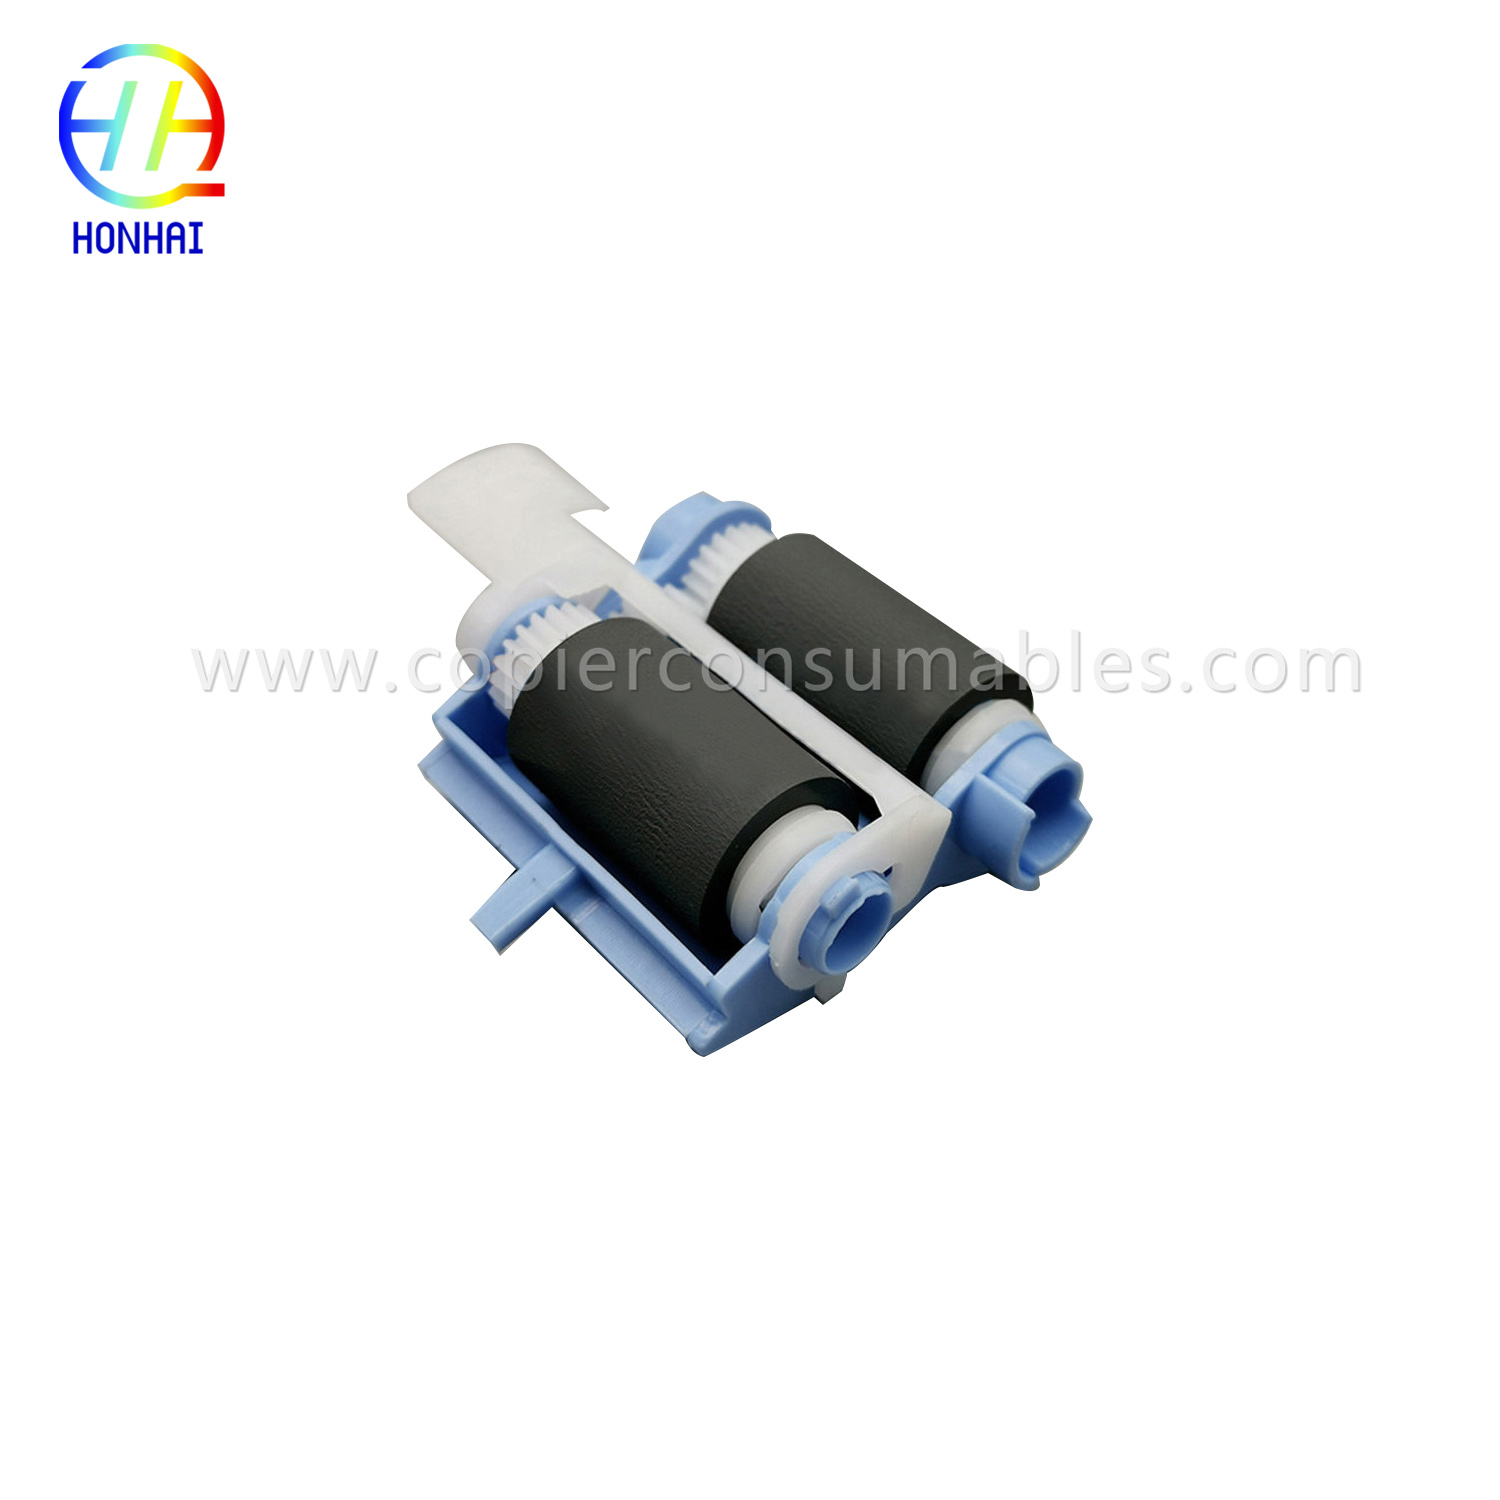 Factory directly Brother L2300d - Tray 2 Pickup Roller for HP Laserjet M501 M506 M527 RC4-4346-000CN – HONHAI